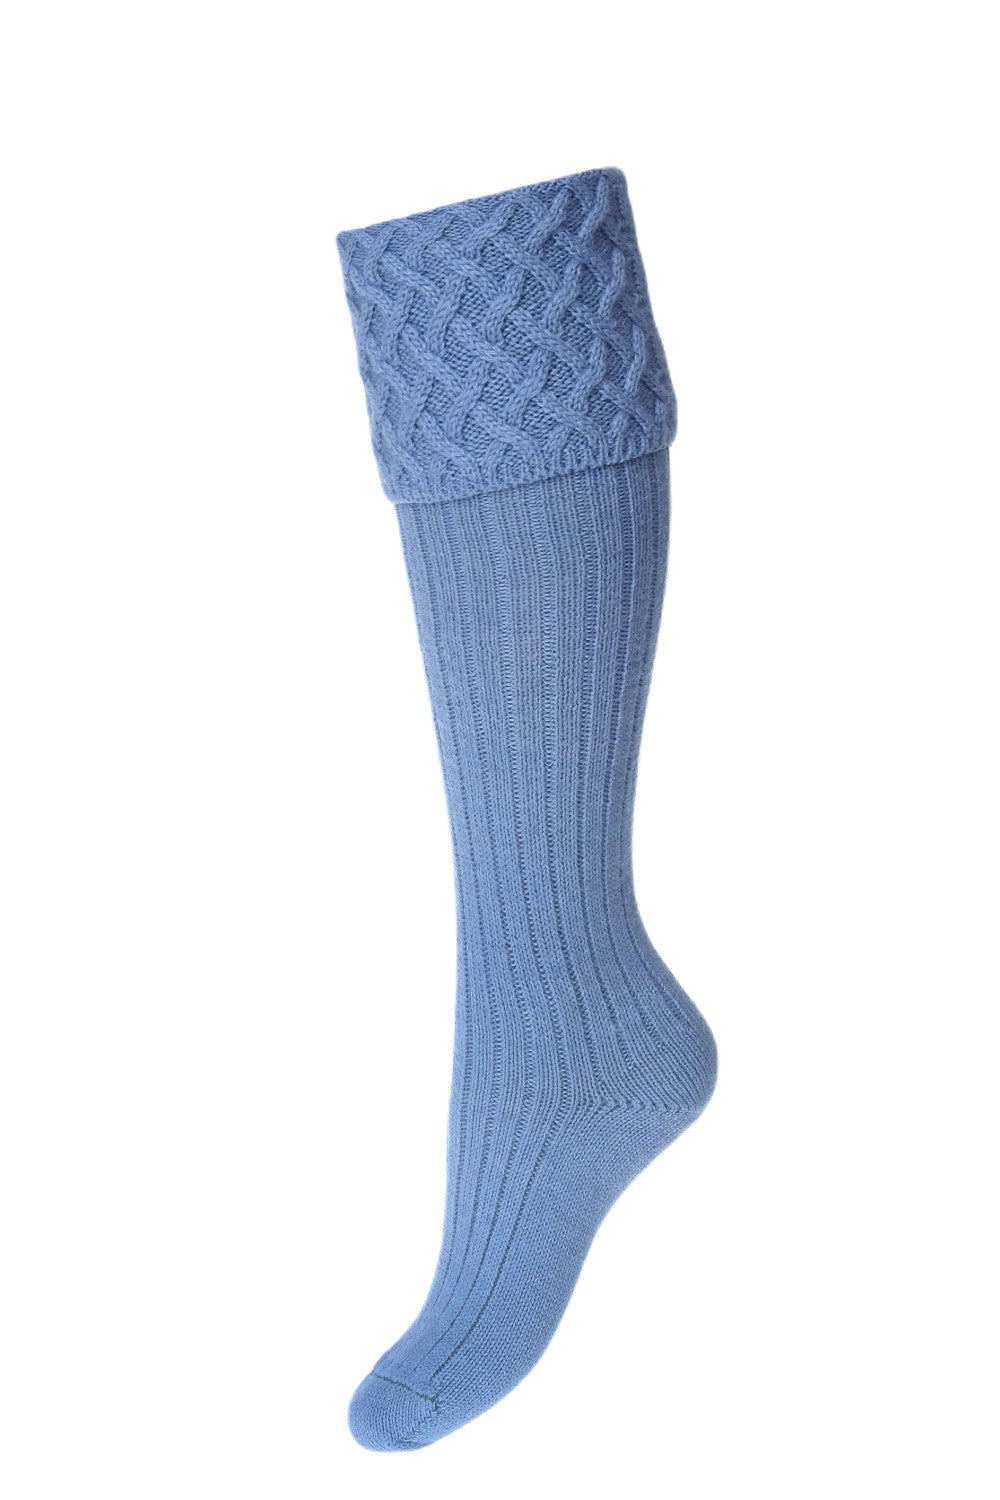 House Of Cheviot Lady Rannoch Socks In Bluebell